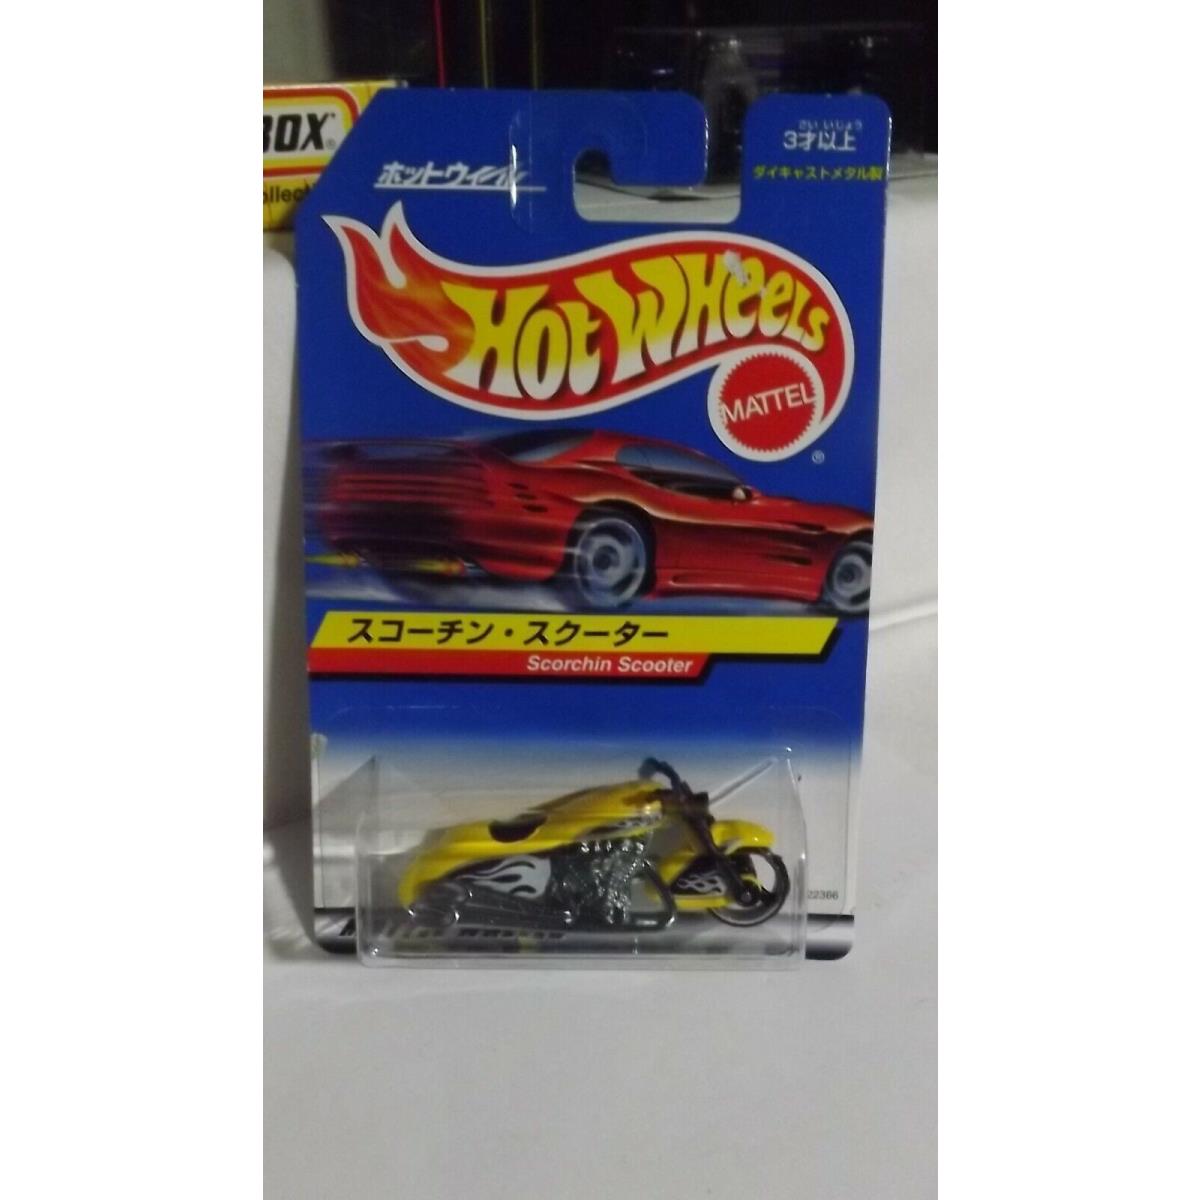 1998 Japanese Hotwheels Yellow Scorchin Scooter All Japanese Writing On Card